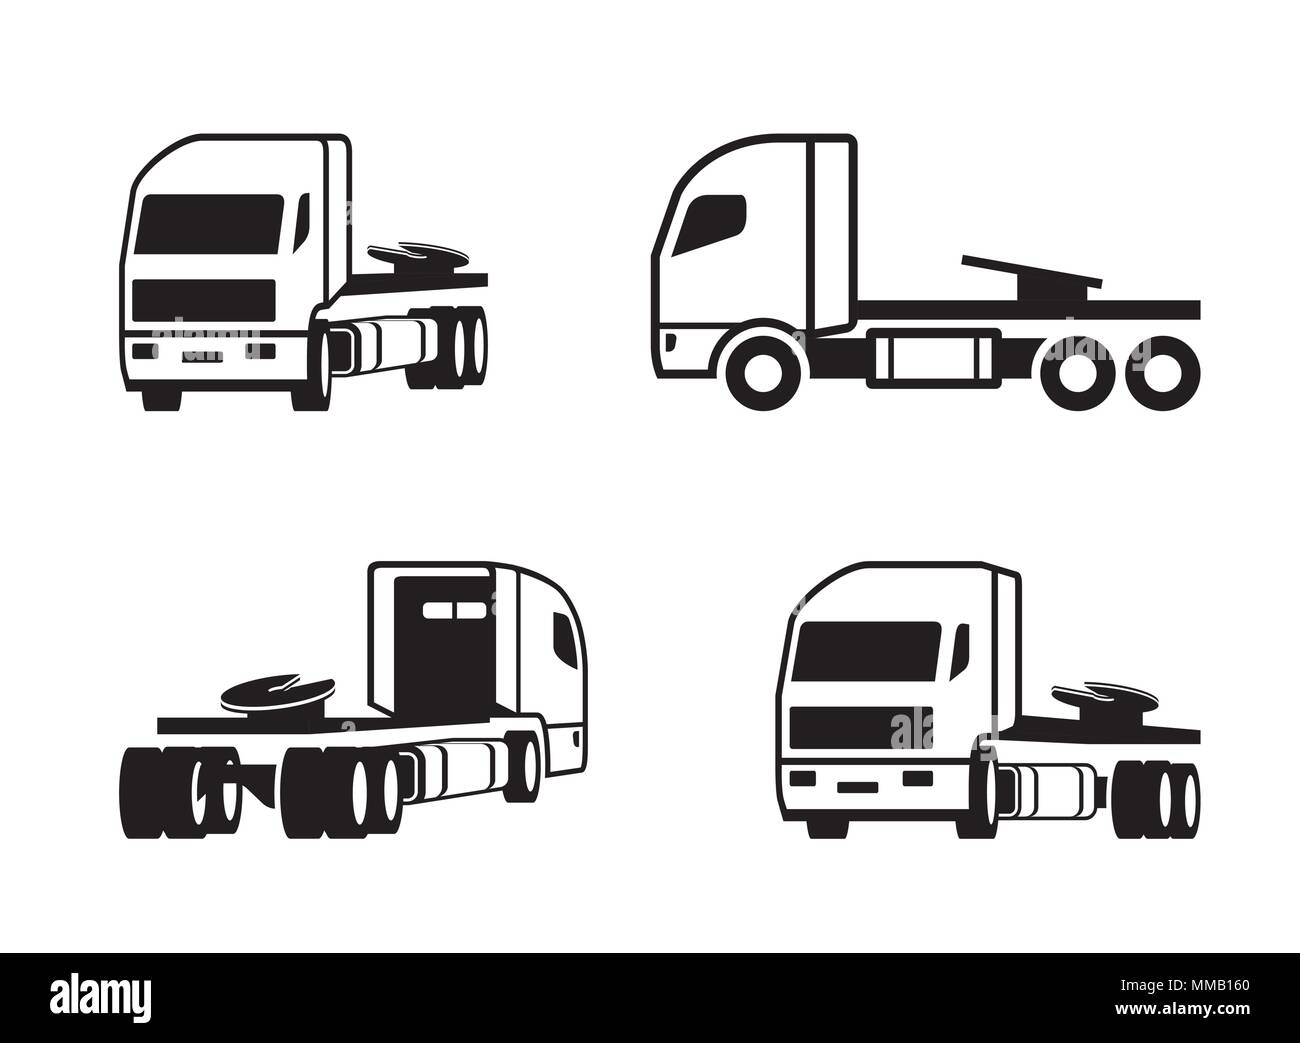 Truck tractor in different perspective - vector illustration Stock Vector